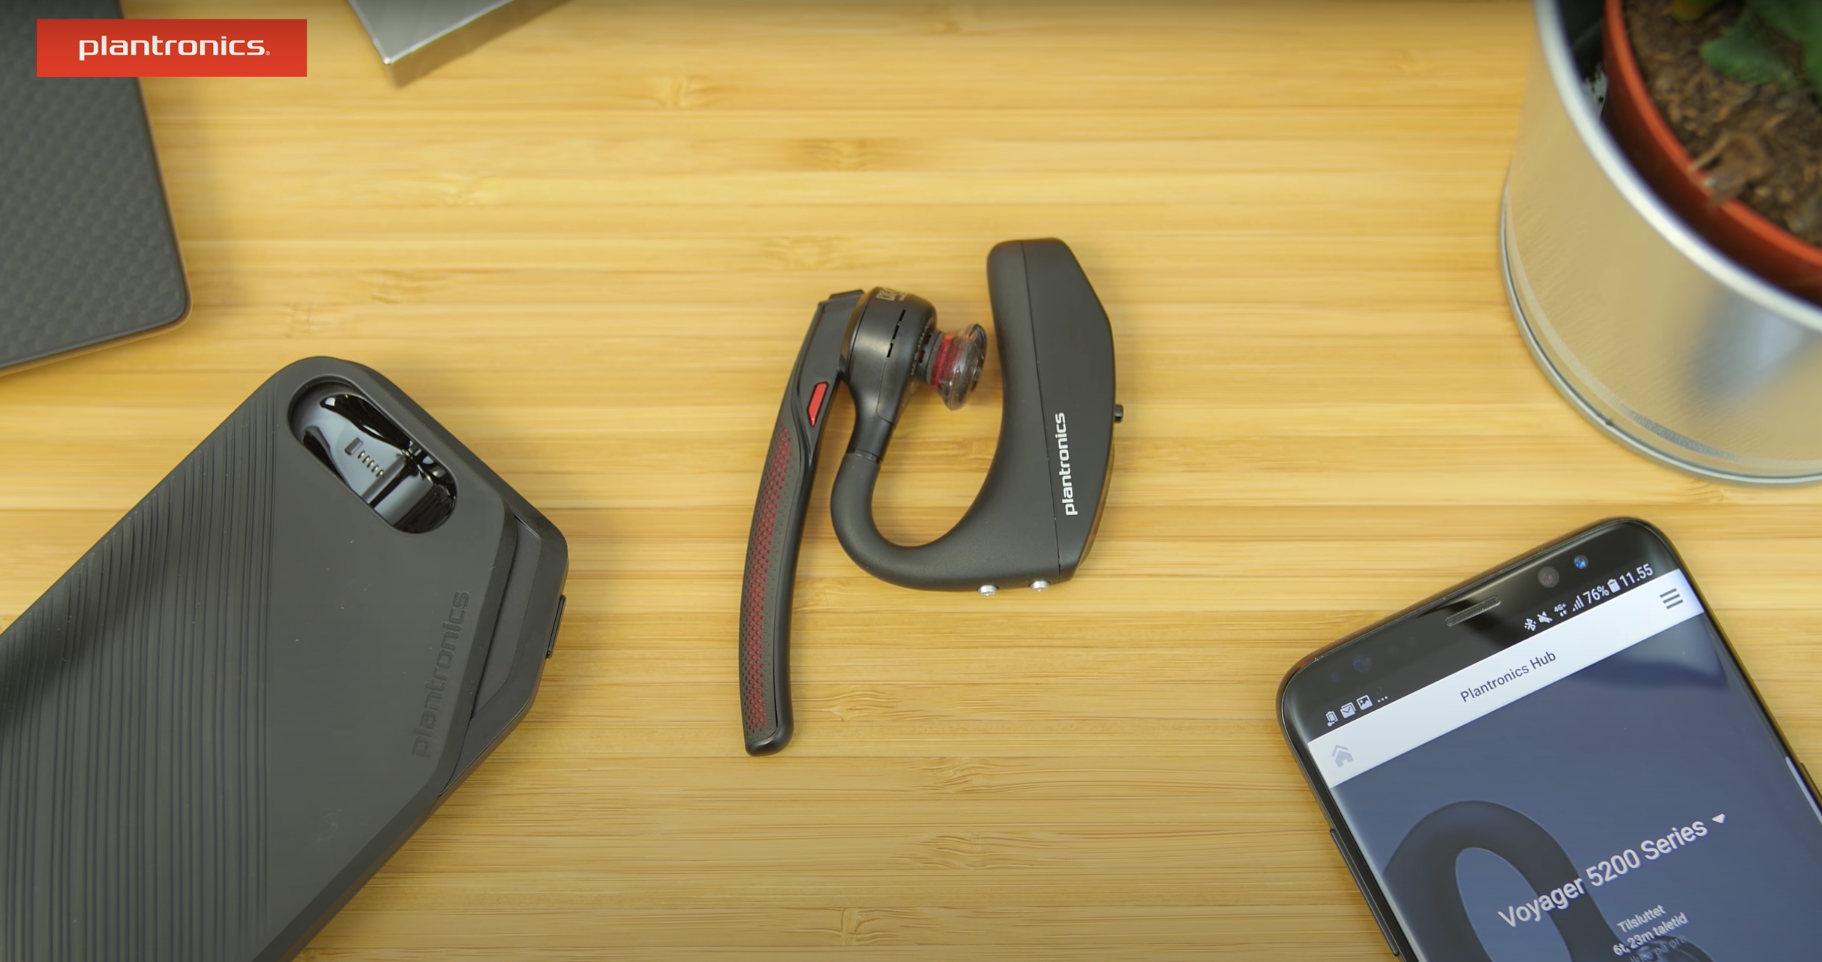 plantronics voyager 5200 voice commands not working